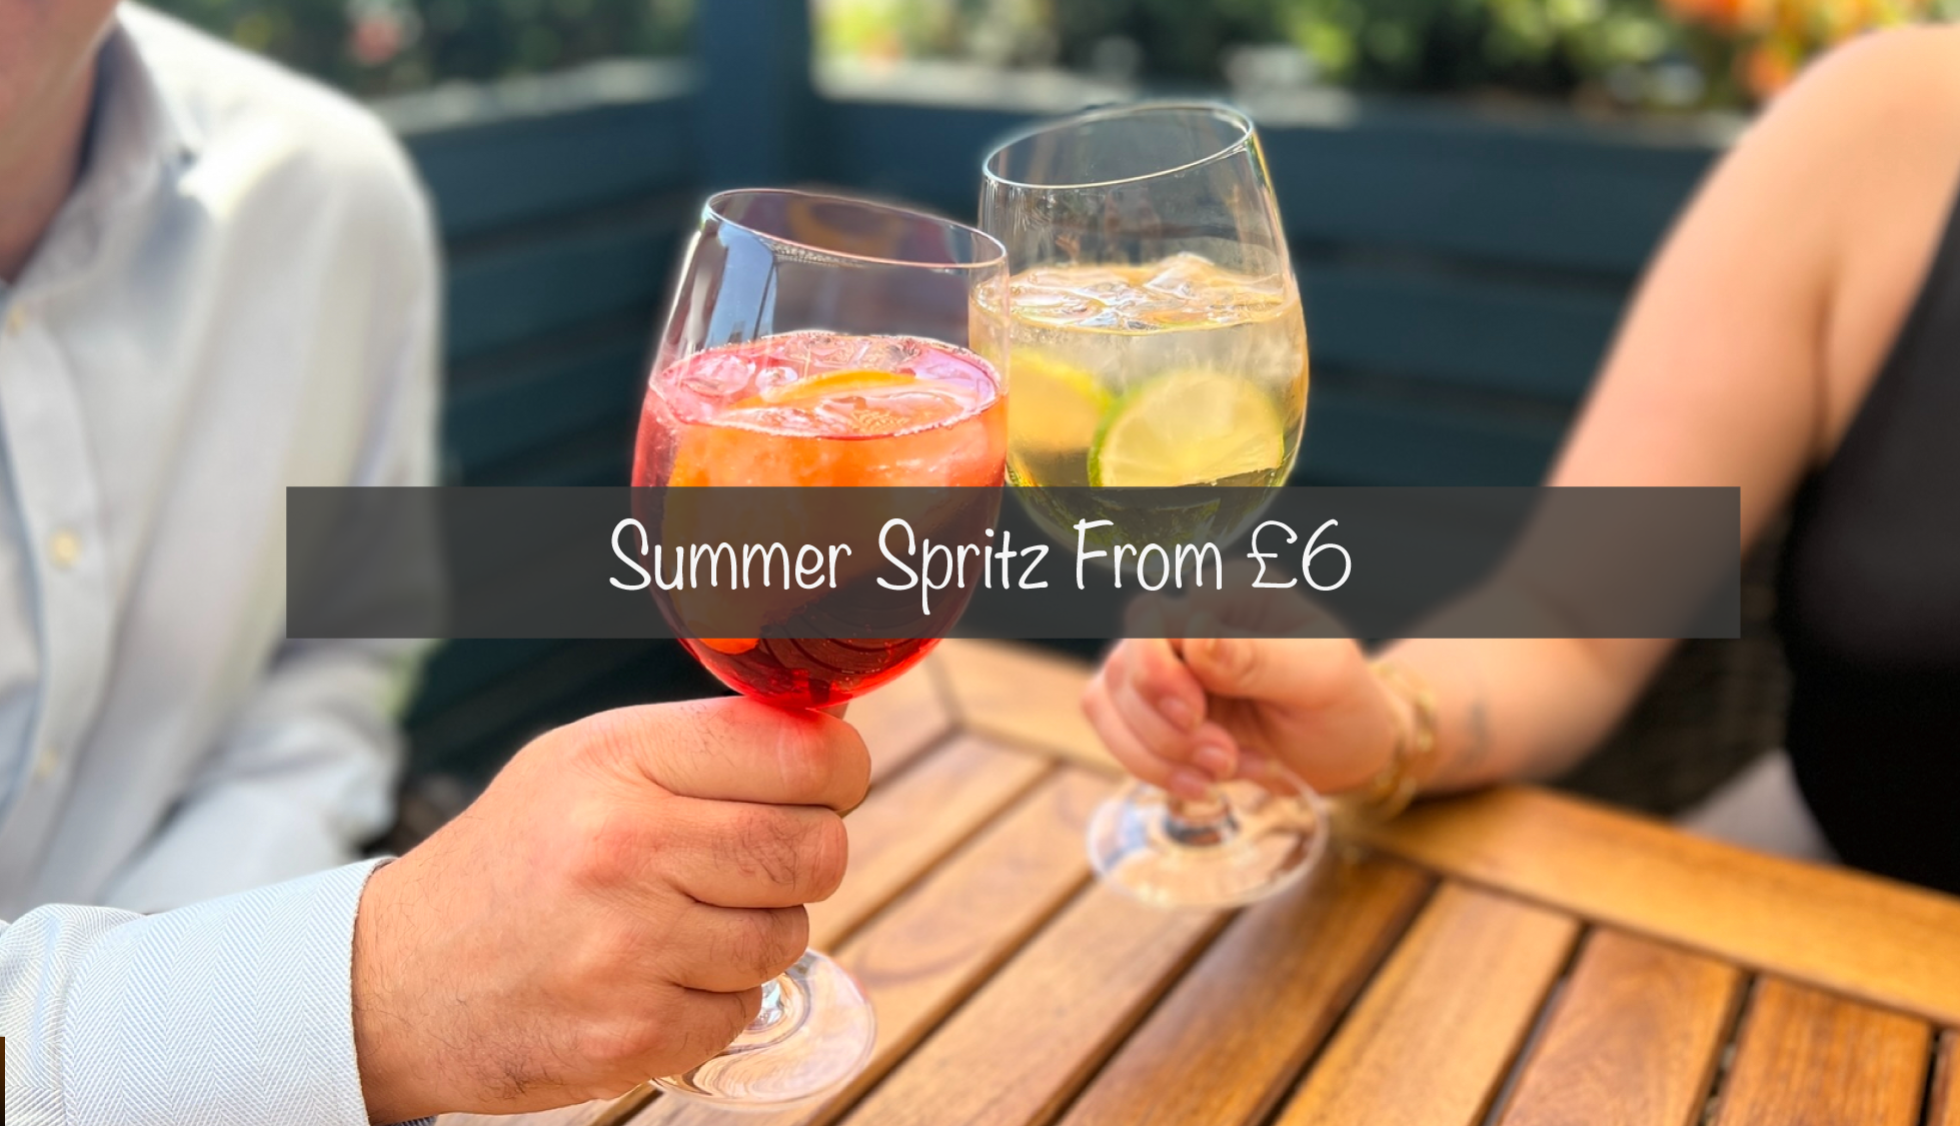 Spritz from £6 cocktail offer at the Wheelwrights Arms